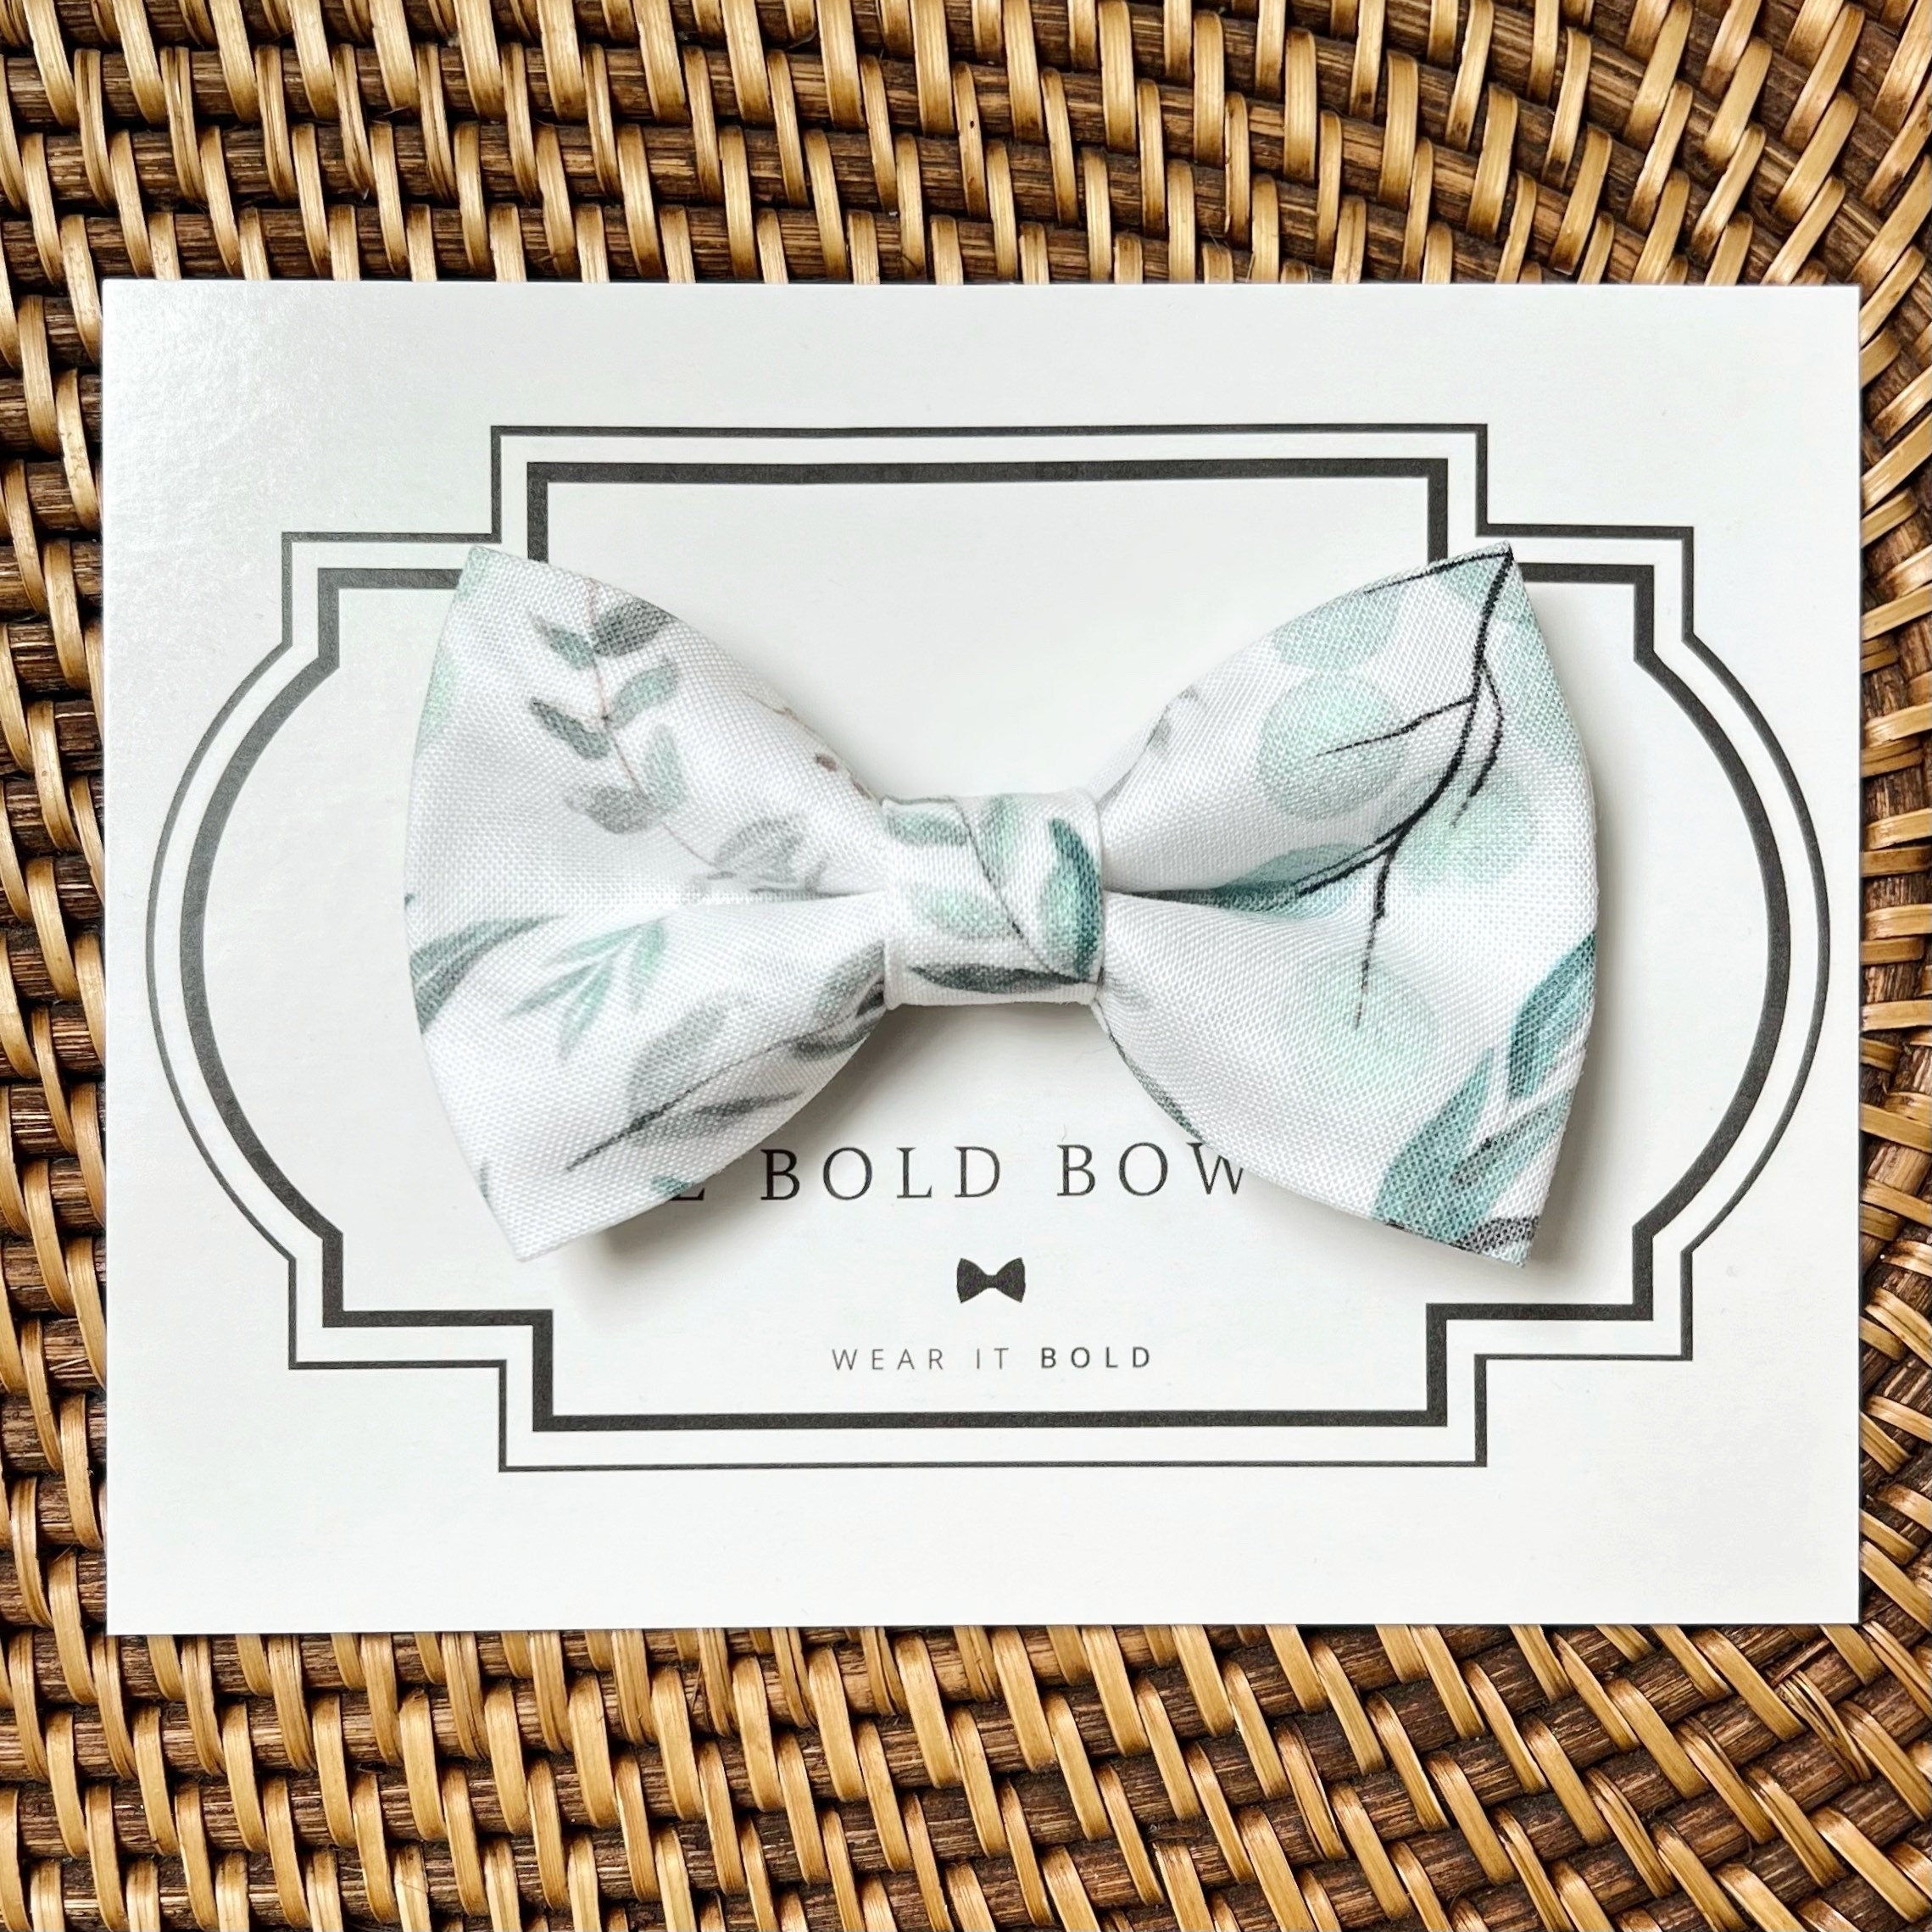 Floral Spring Dog Bow Tie or Cat Bow Tie Gift Set